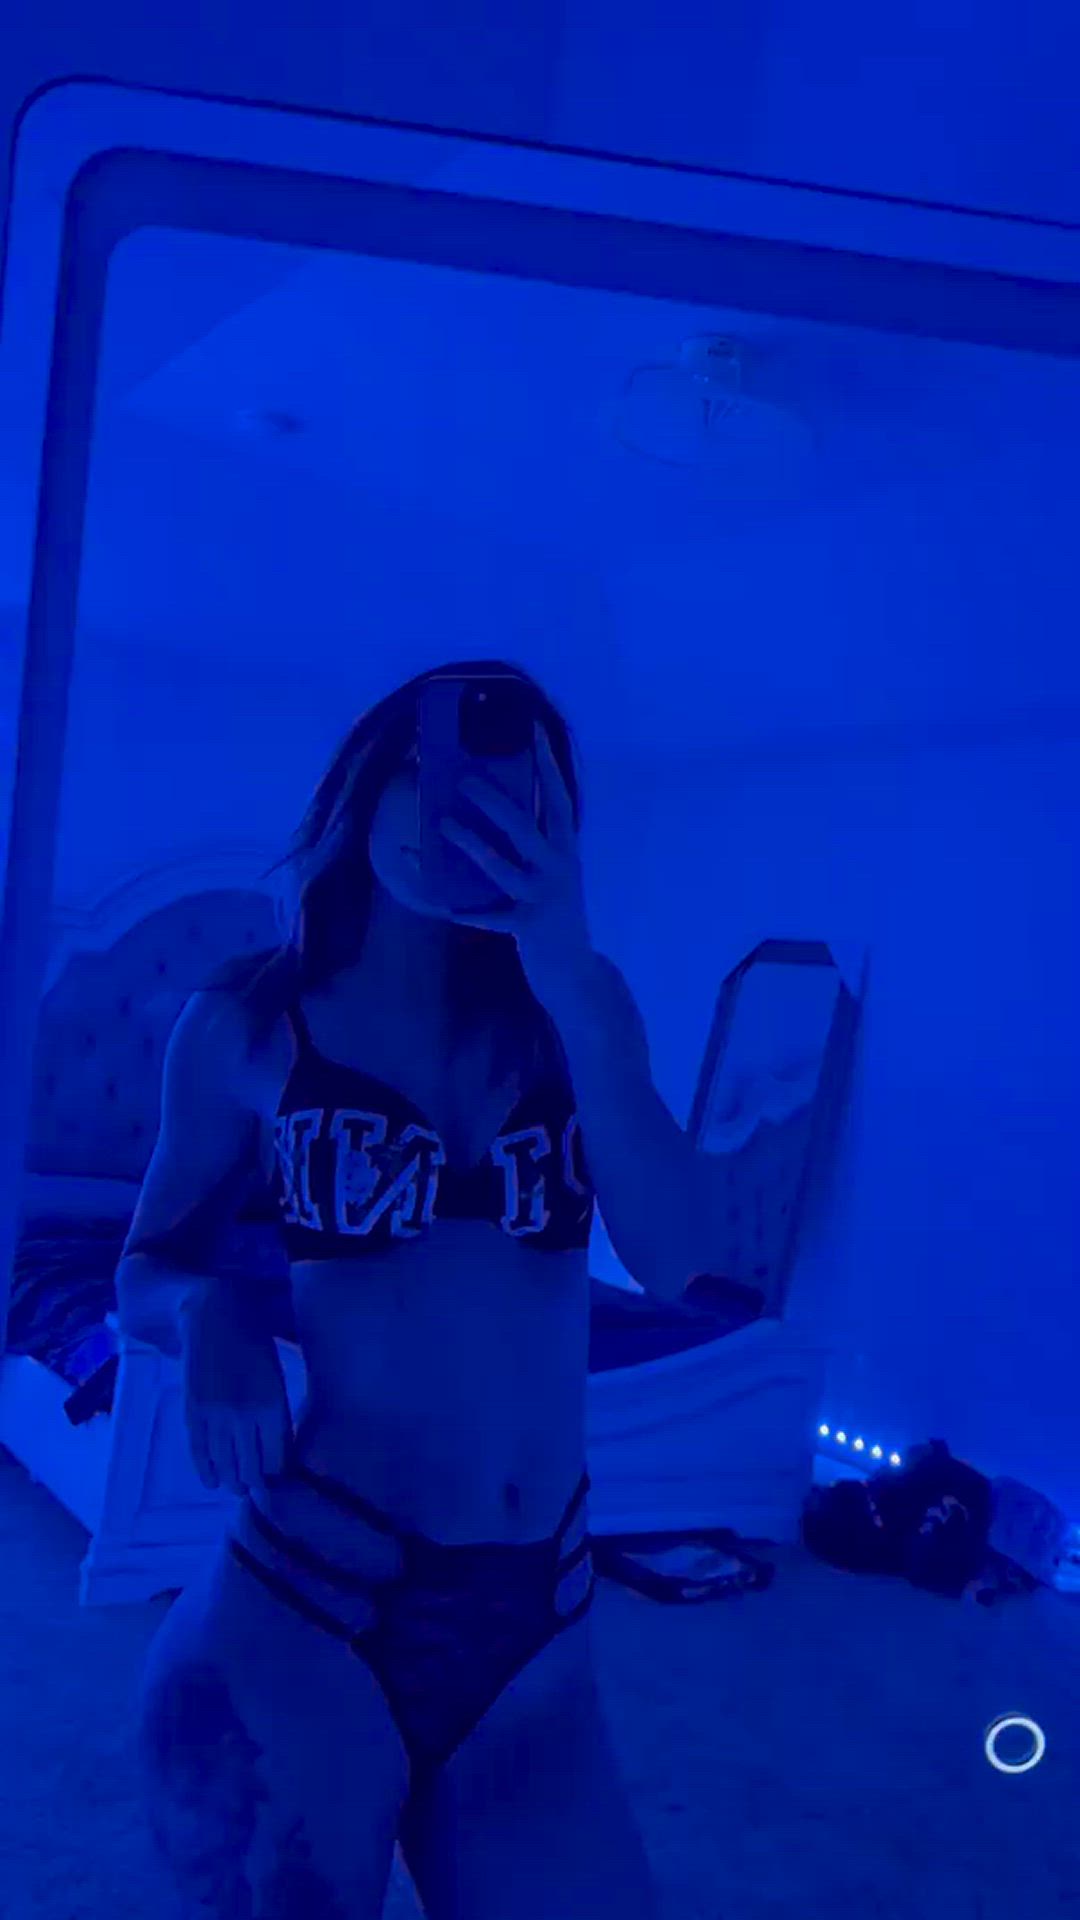 Amateur porn video with onlyfans model sassyslothxx <strong>@sassysloth</strong>